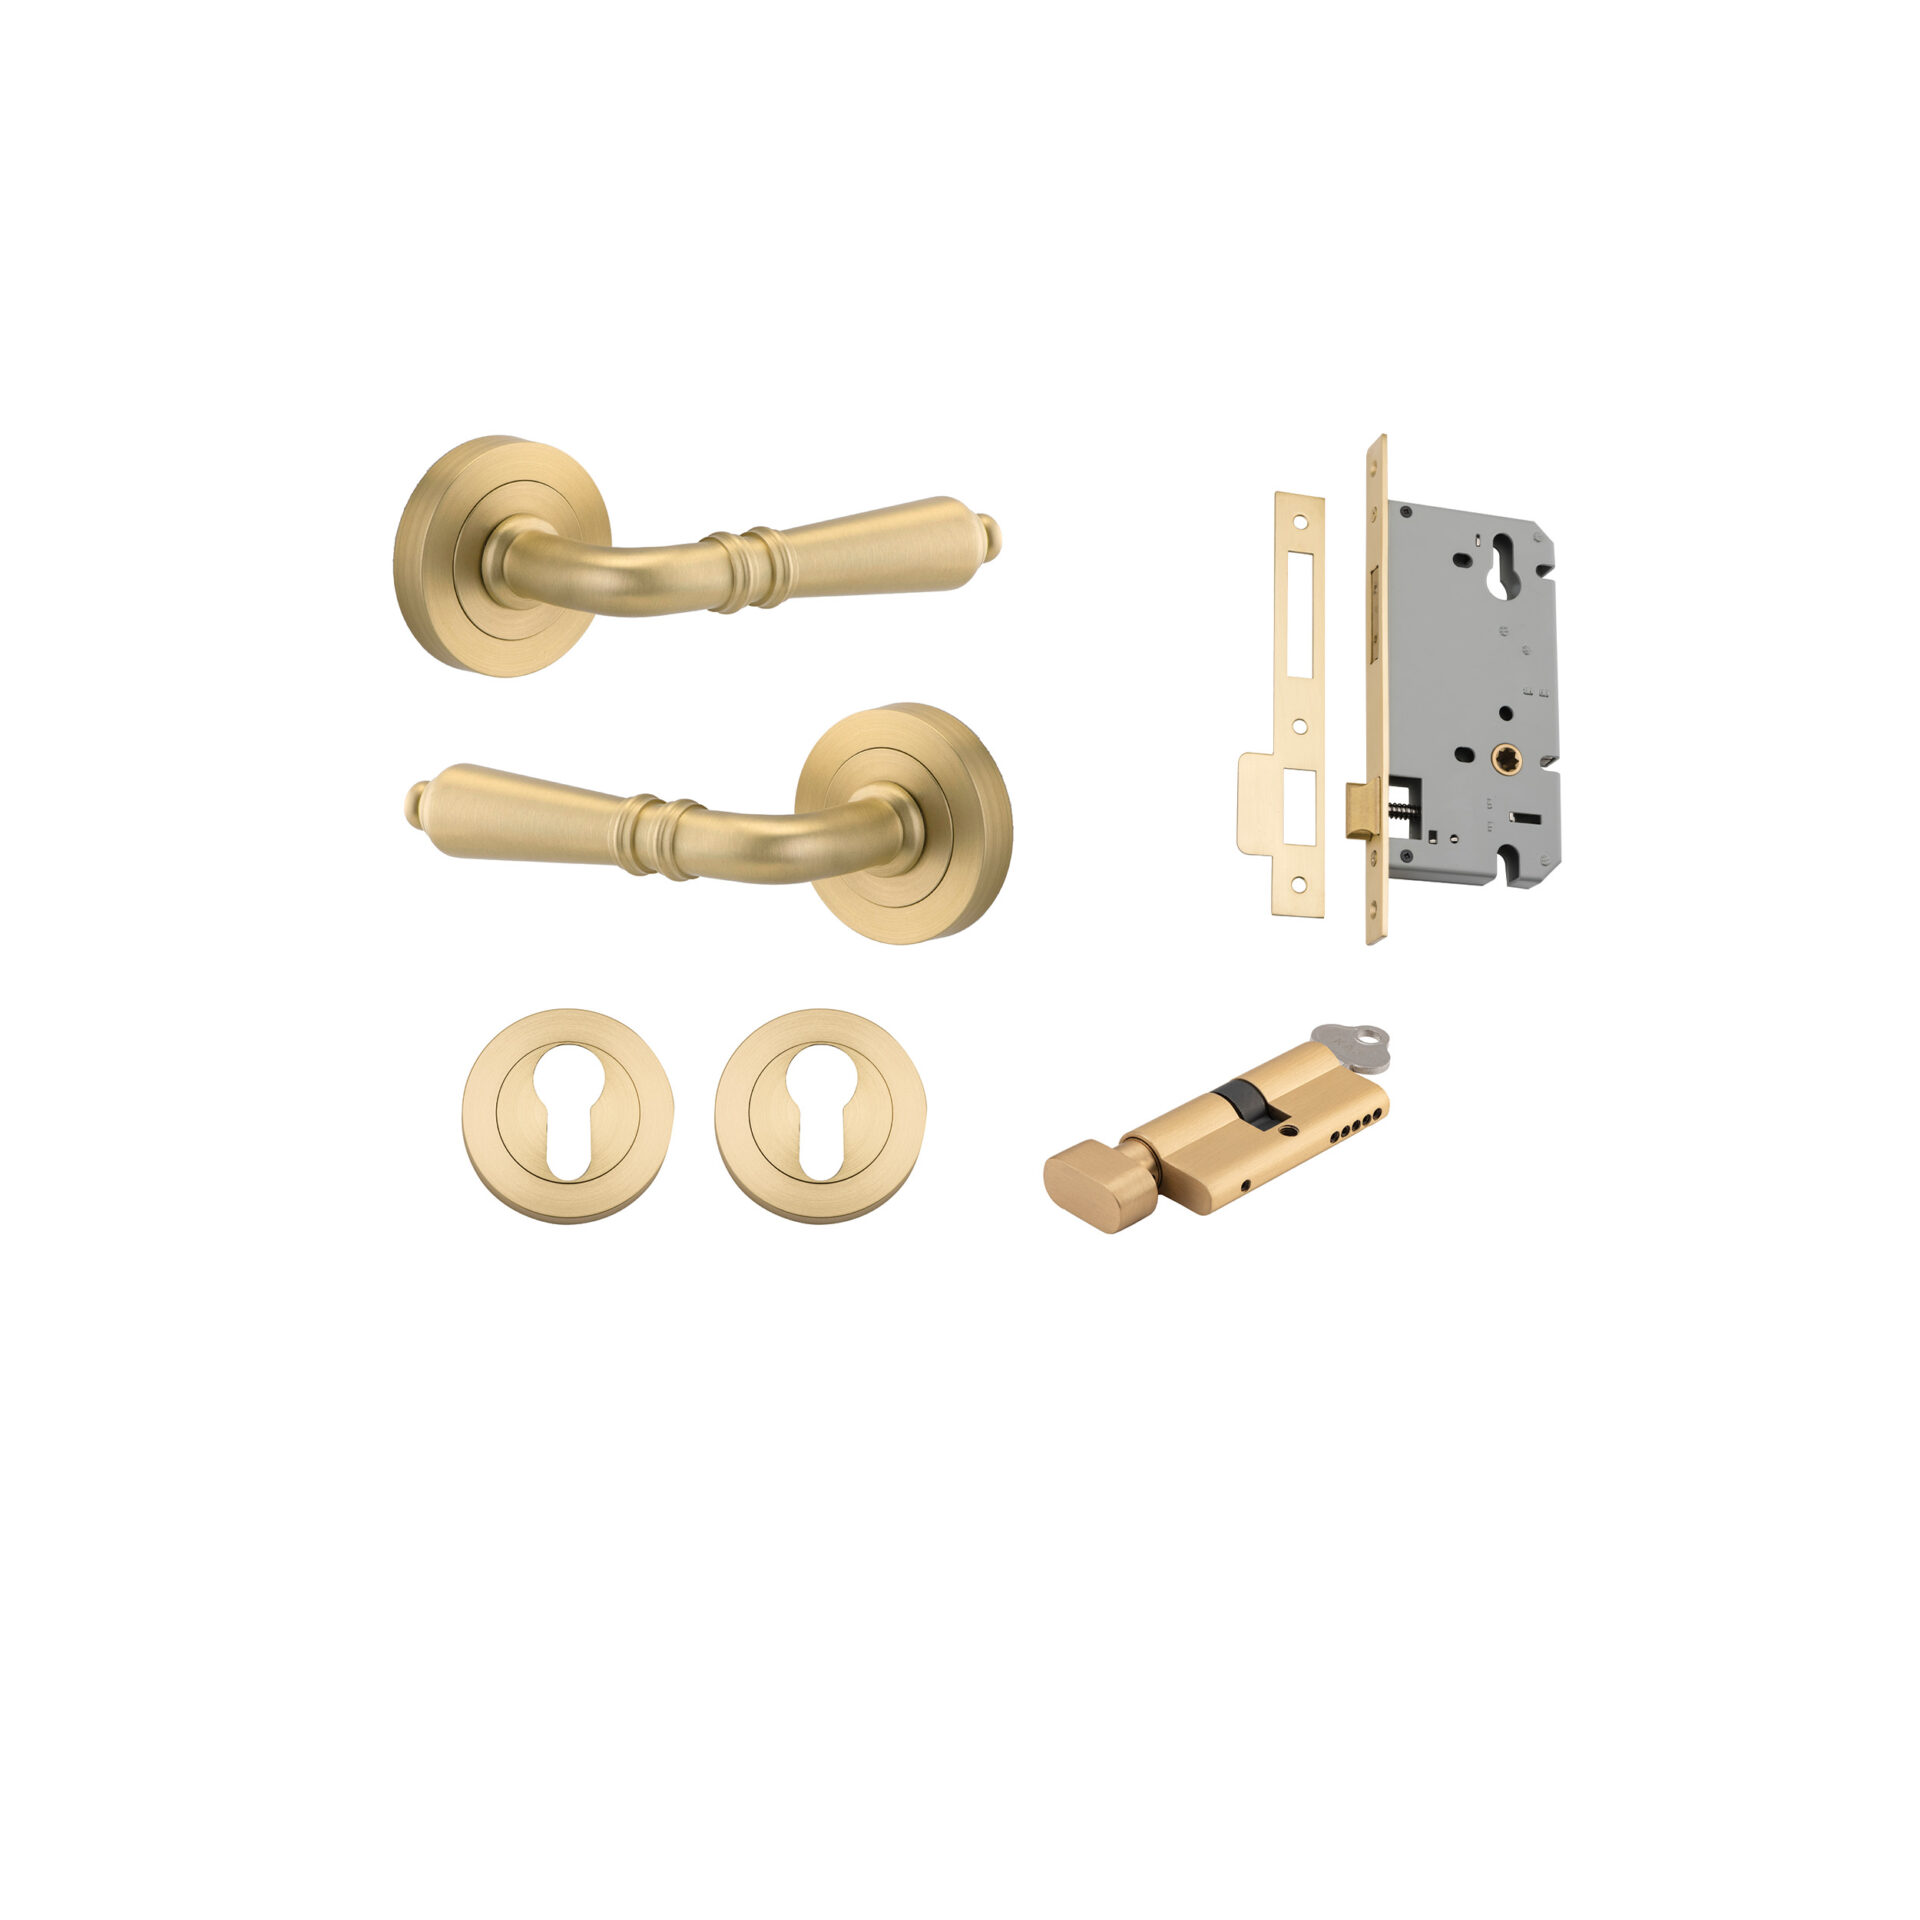 16260KENTR60KT - Sarlat Lever - Round Rose Entrance Kit with Separate High Security Lock - Brushed Gold PVD - Entrance